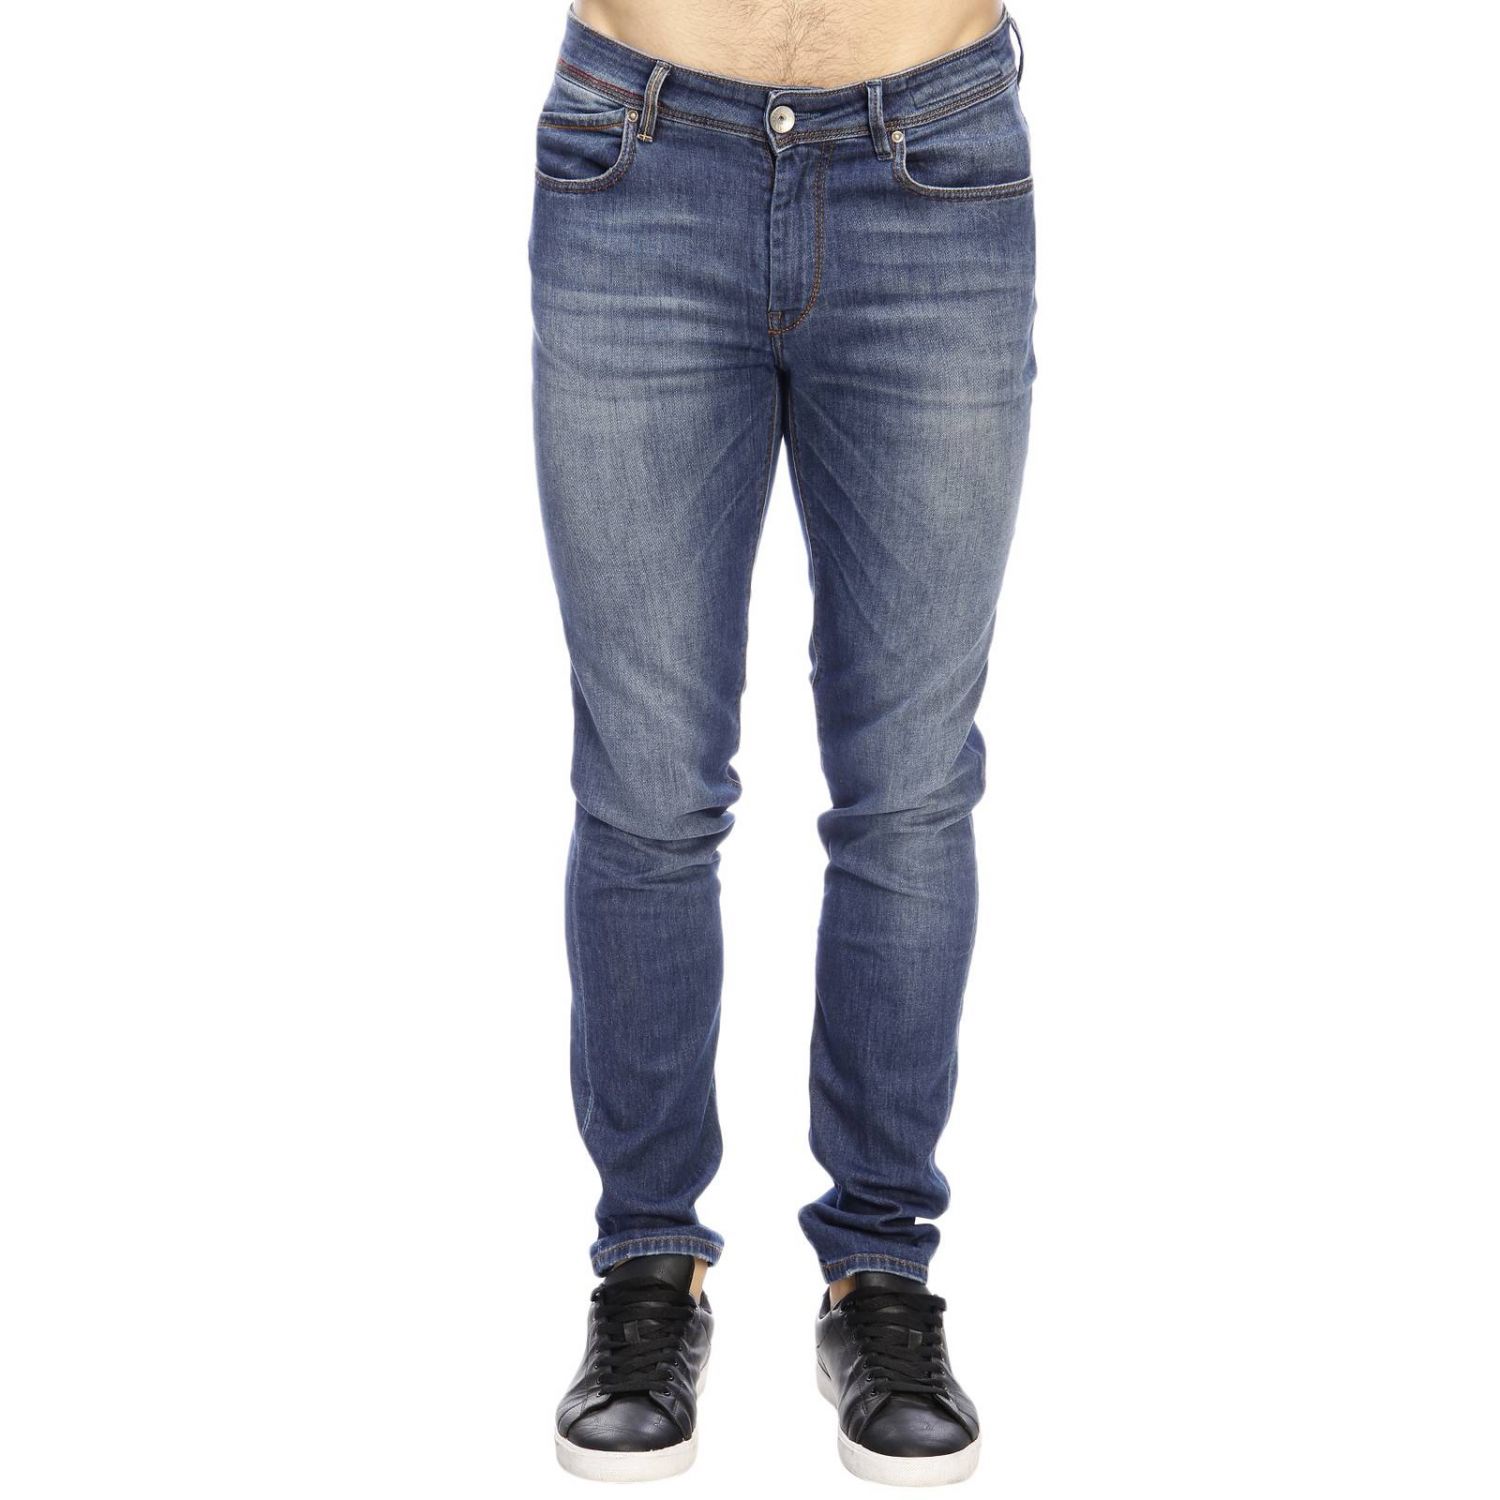 Re-Hash Outlet: Jeans men - Blue | Jeans Re-Hash P015 2697 GIGLIO.COM